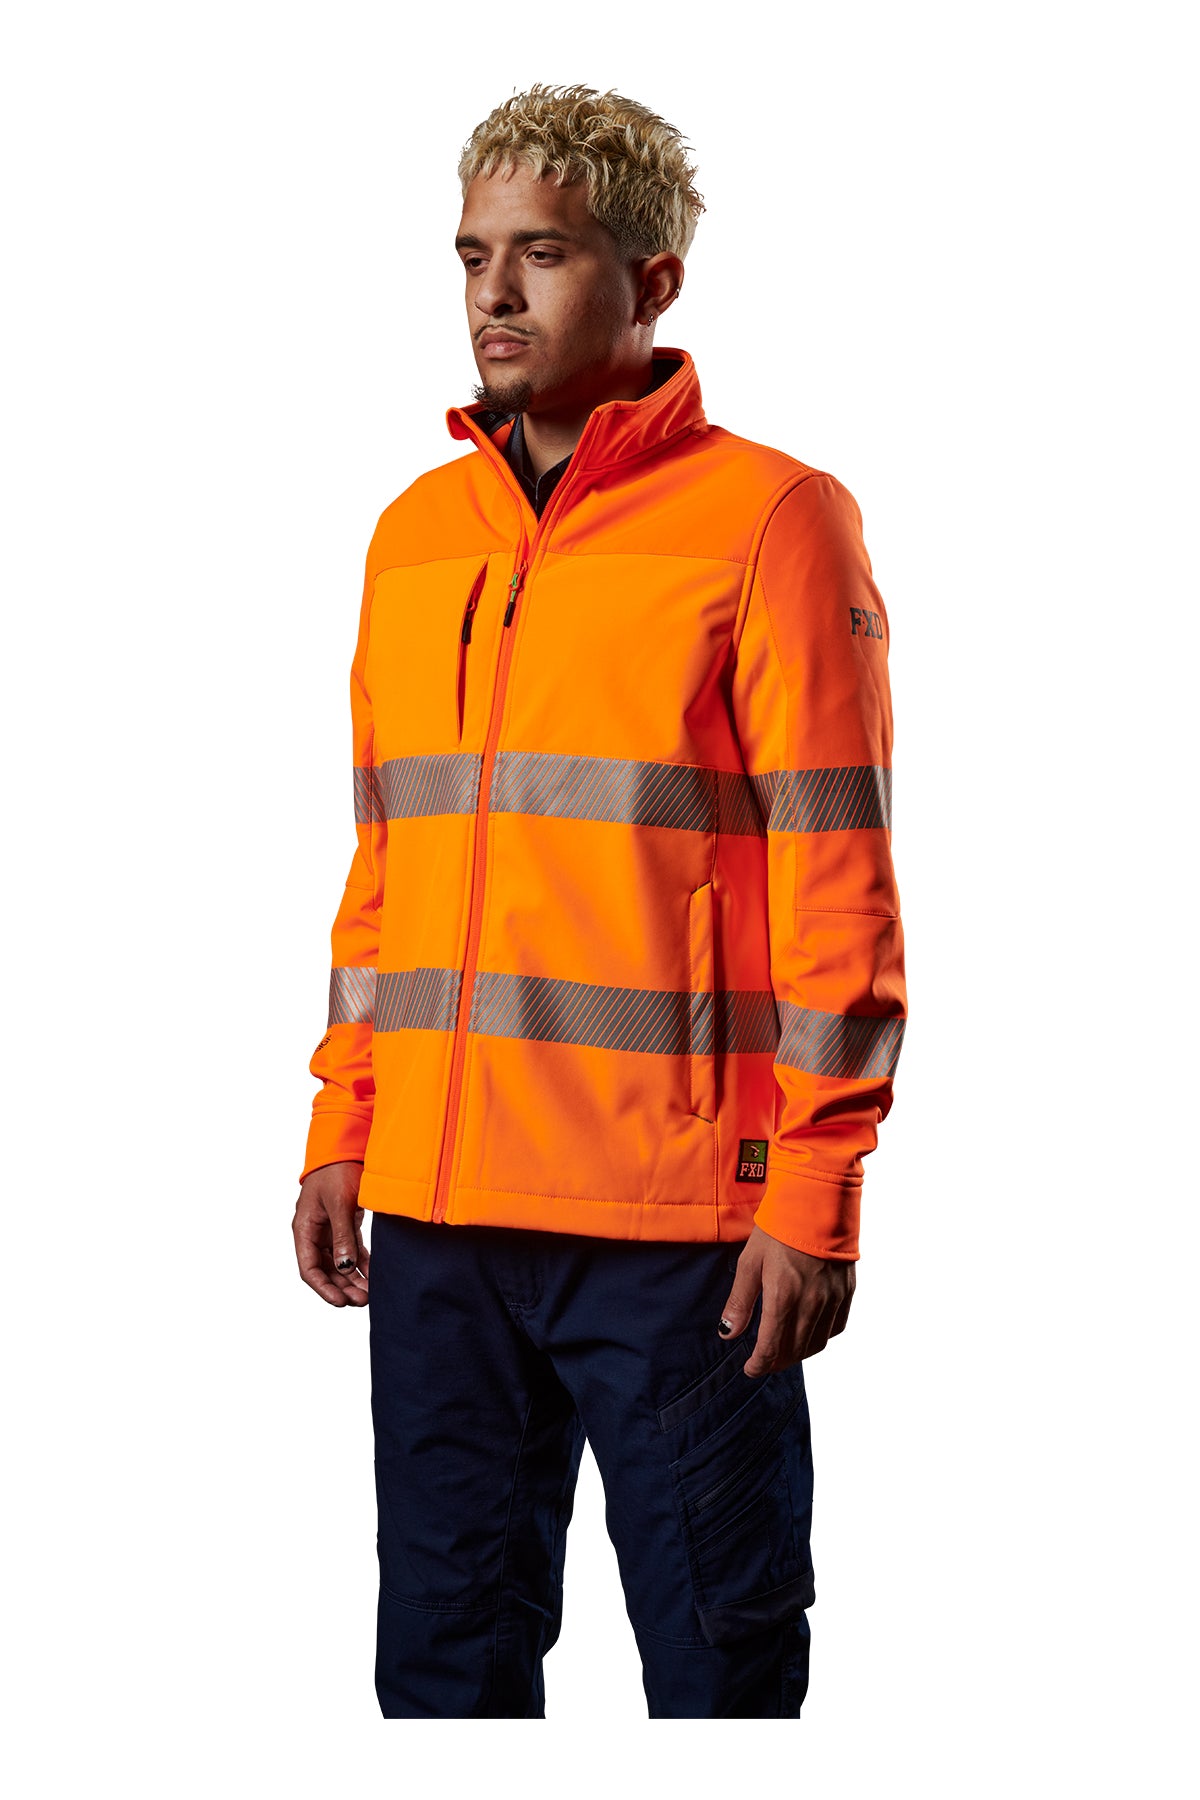 FXD WO-3T Hi Vis Soft Shell Taped Jacket